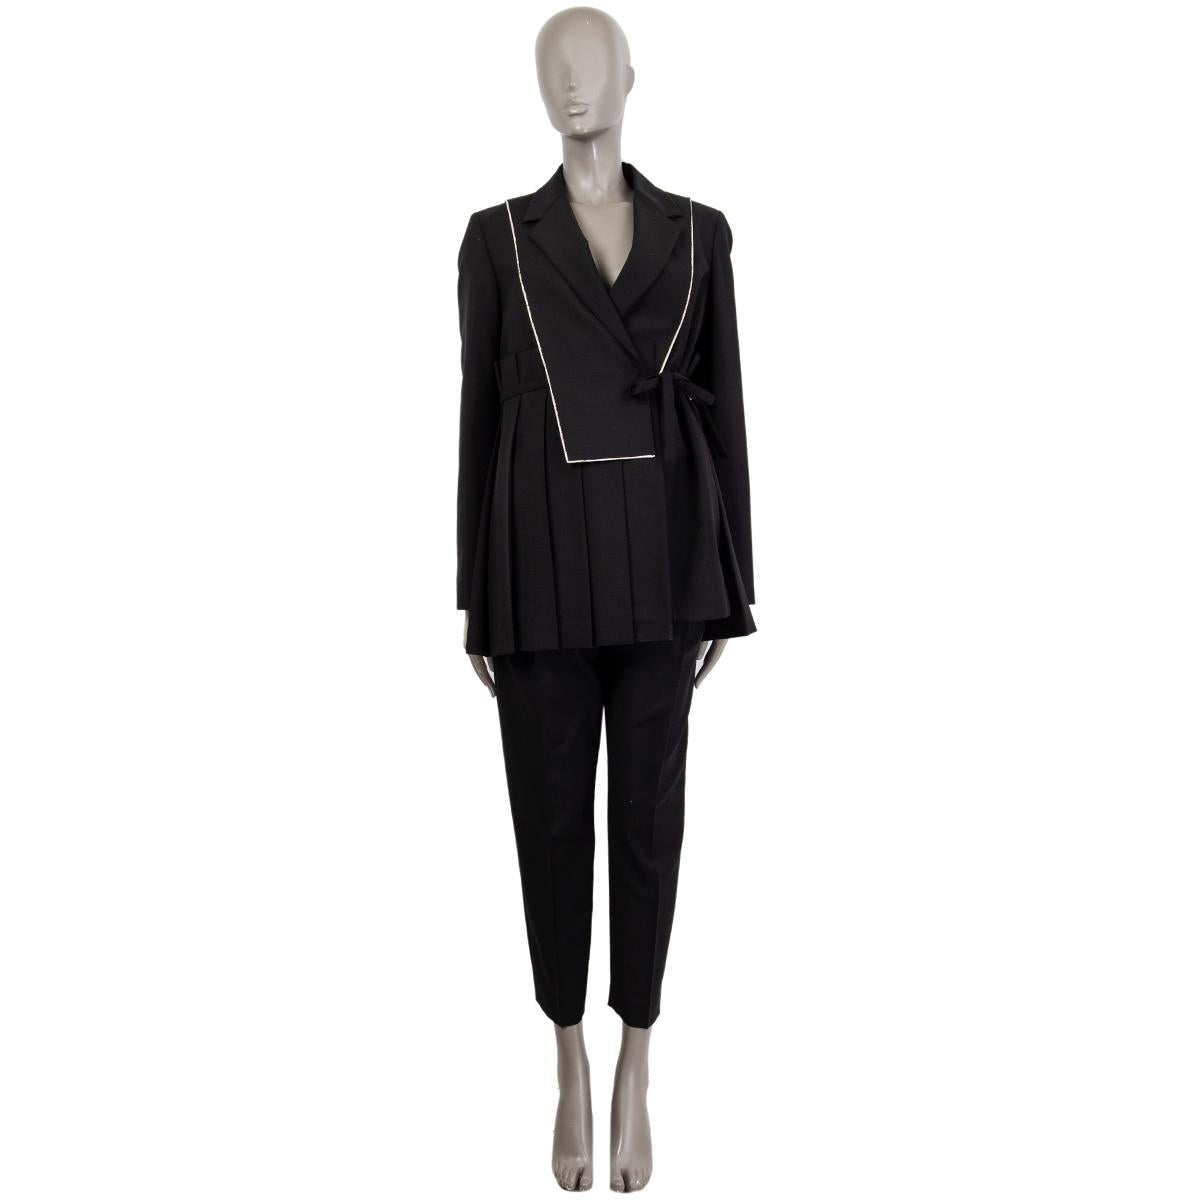 100% authentic Jil Sander blazer in black wool (73%) and mohair (27%) with off-white tim around flap and notch collar. Features one sided pleates at front and full pleats on back. Closes with one button and a strap. Lined in black viscose (55%) and